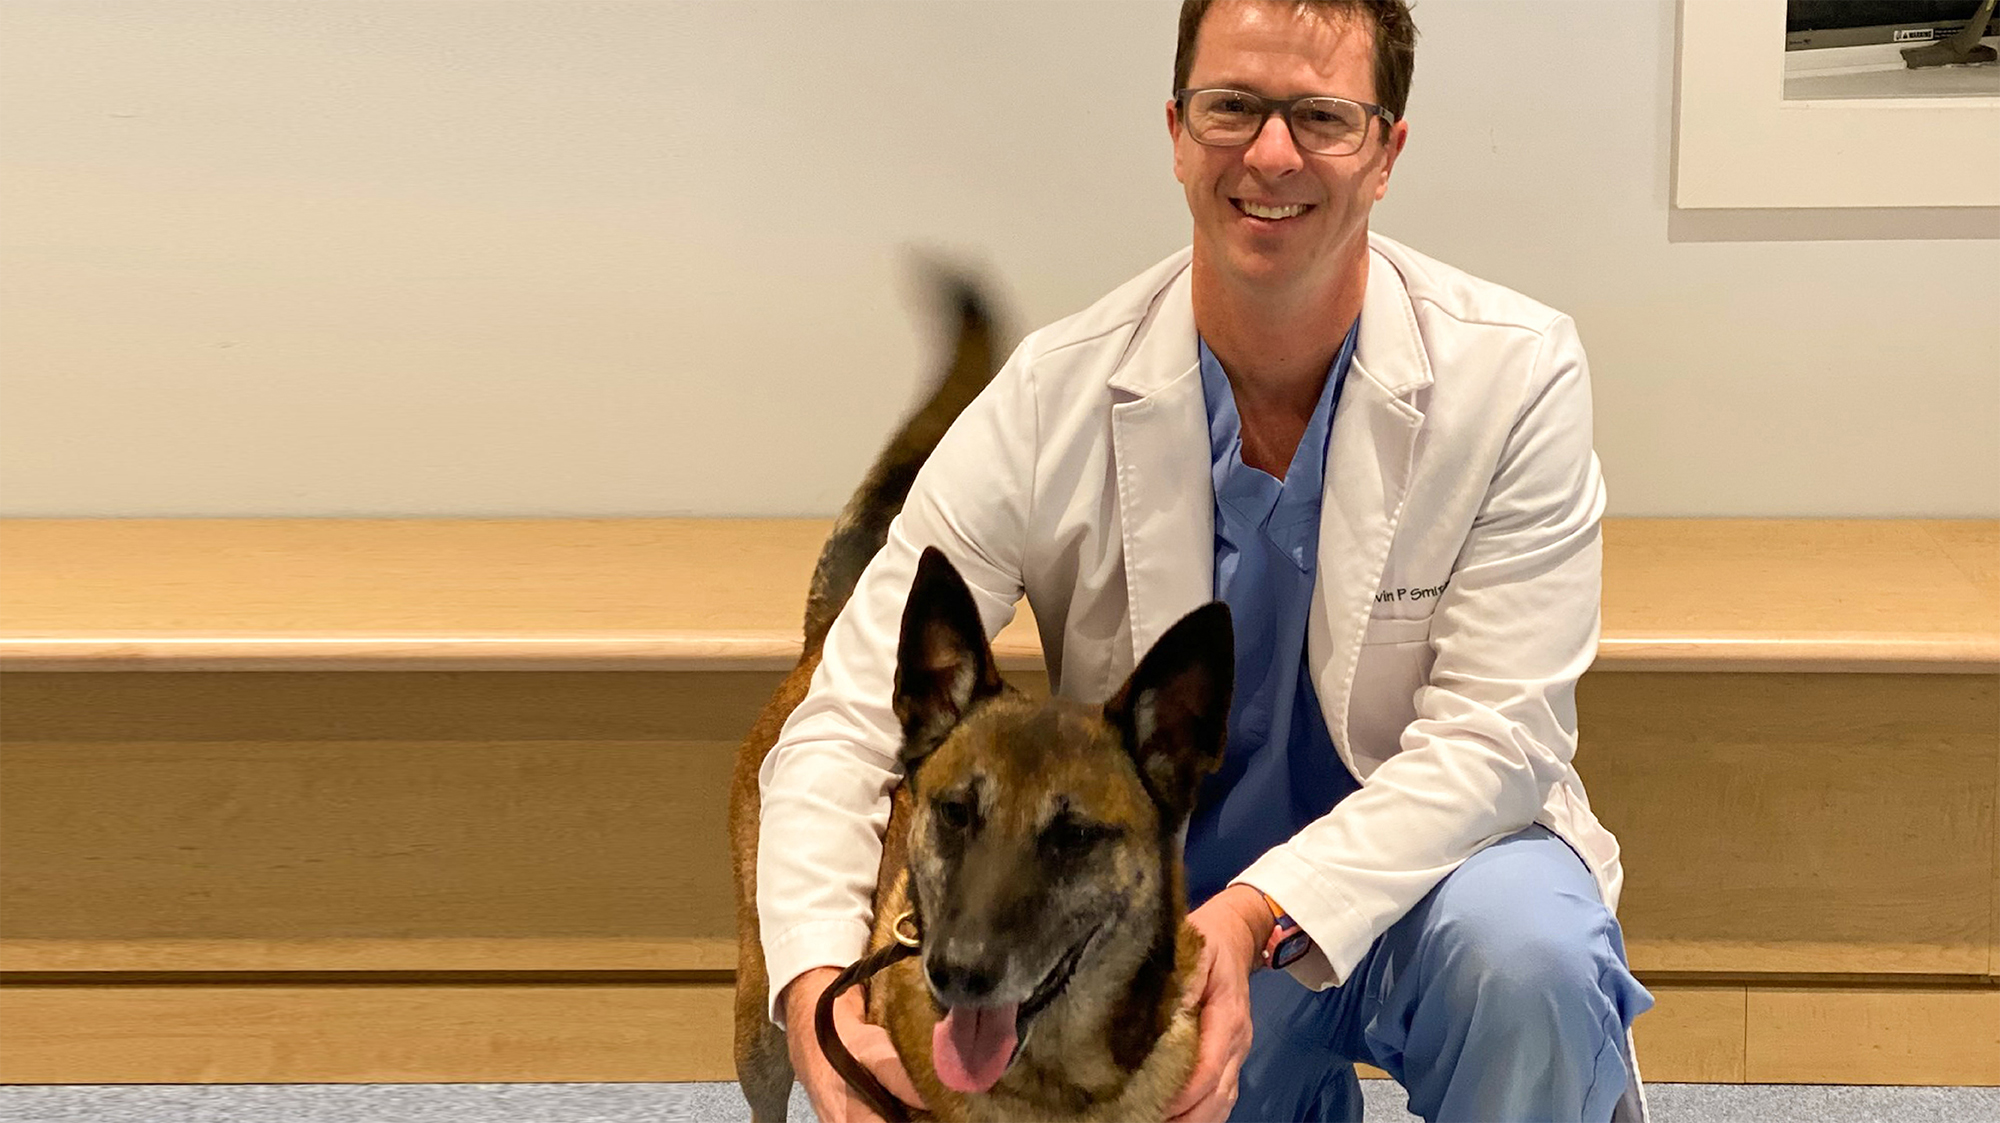 Dr. Smith with dog